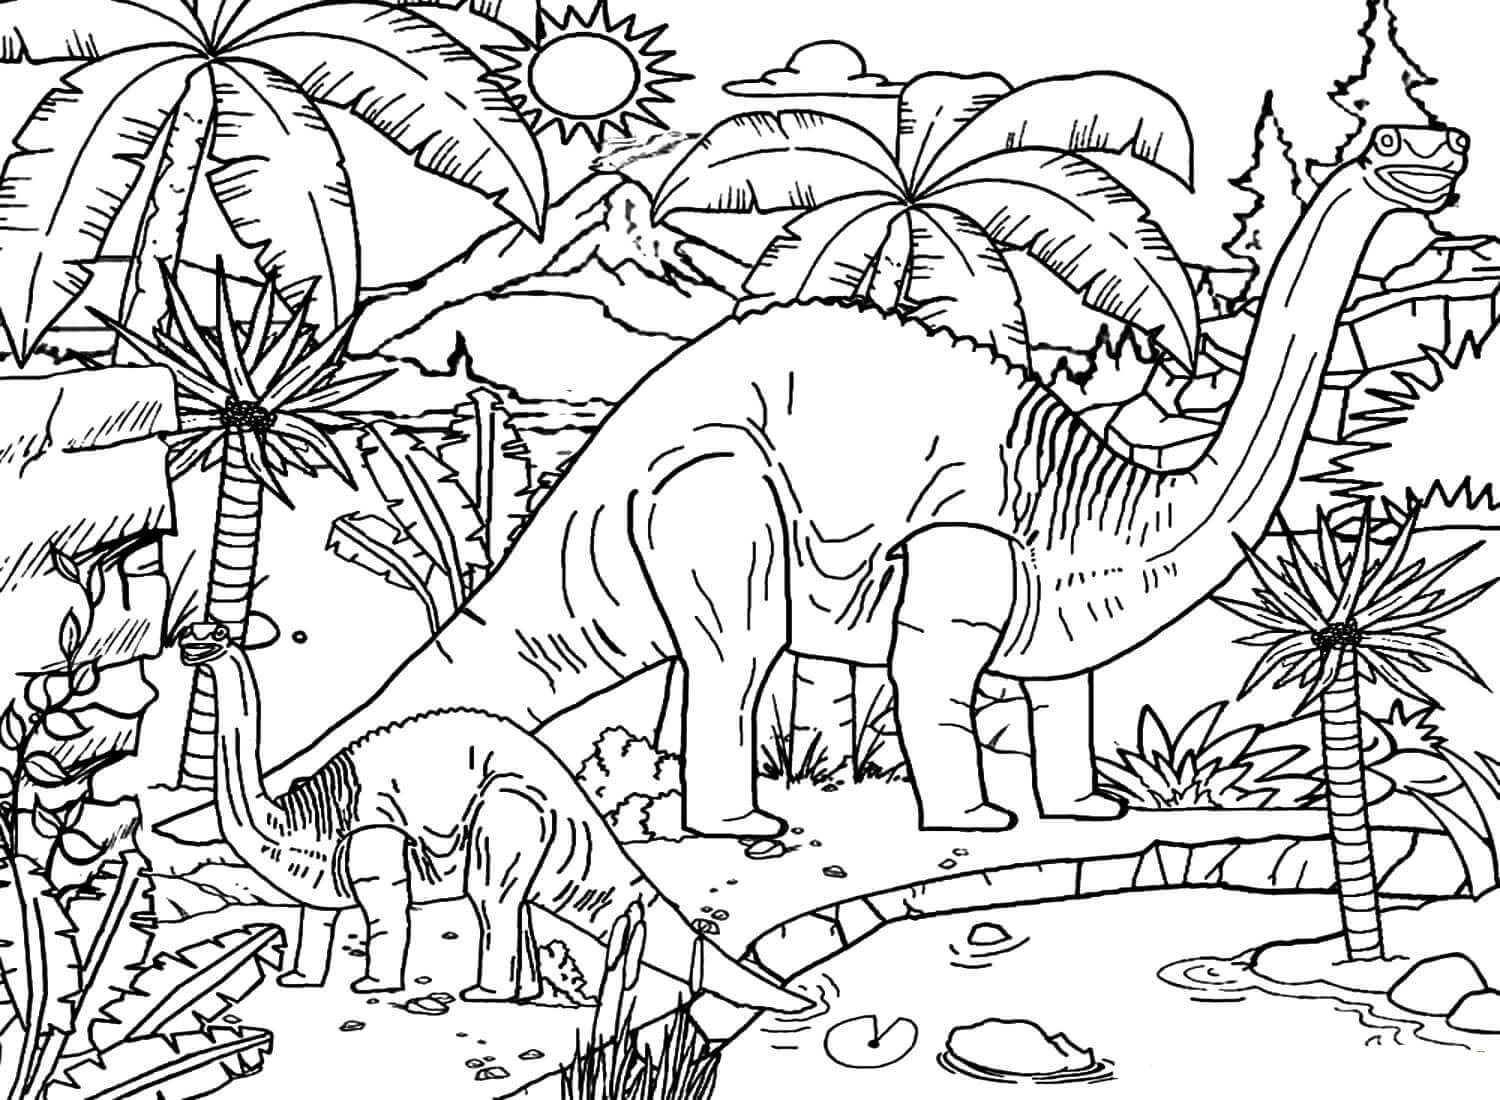 Jurassic World Coloring Page Free from Jurassic World